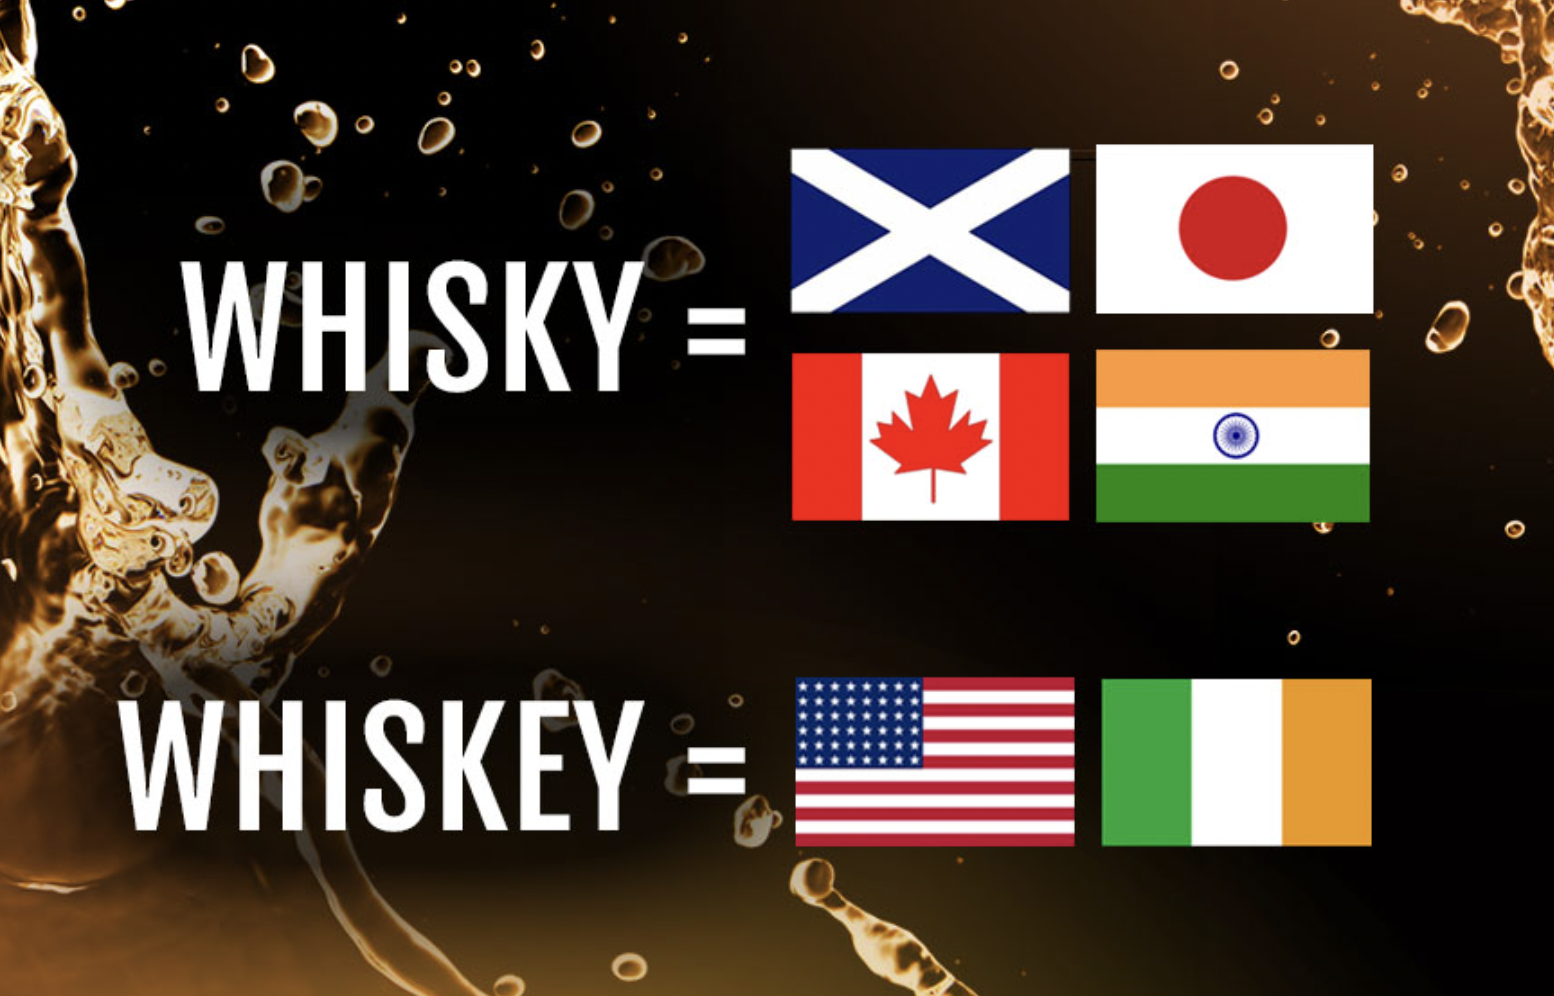 Whiskey or Whisky - Country based